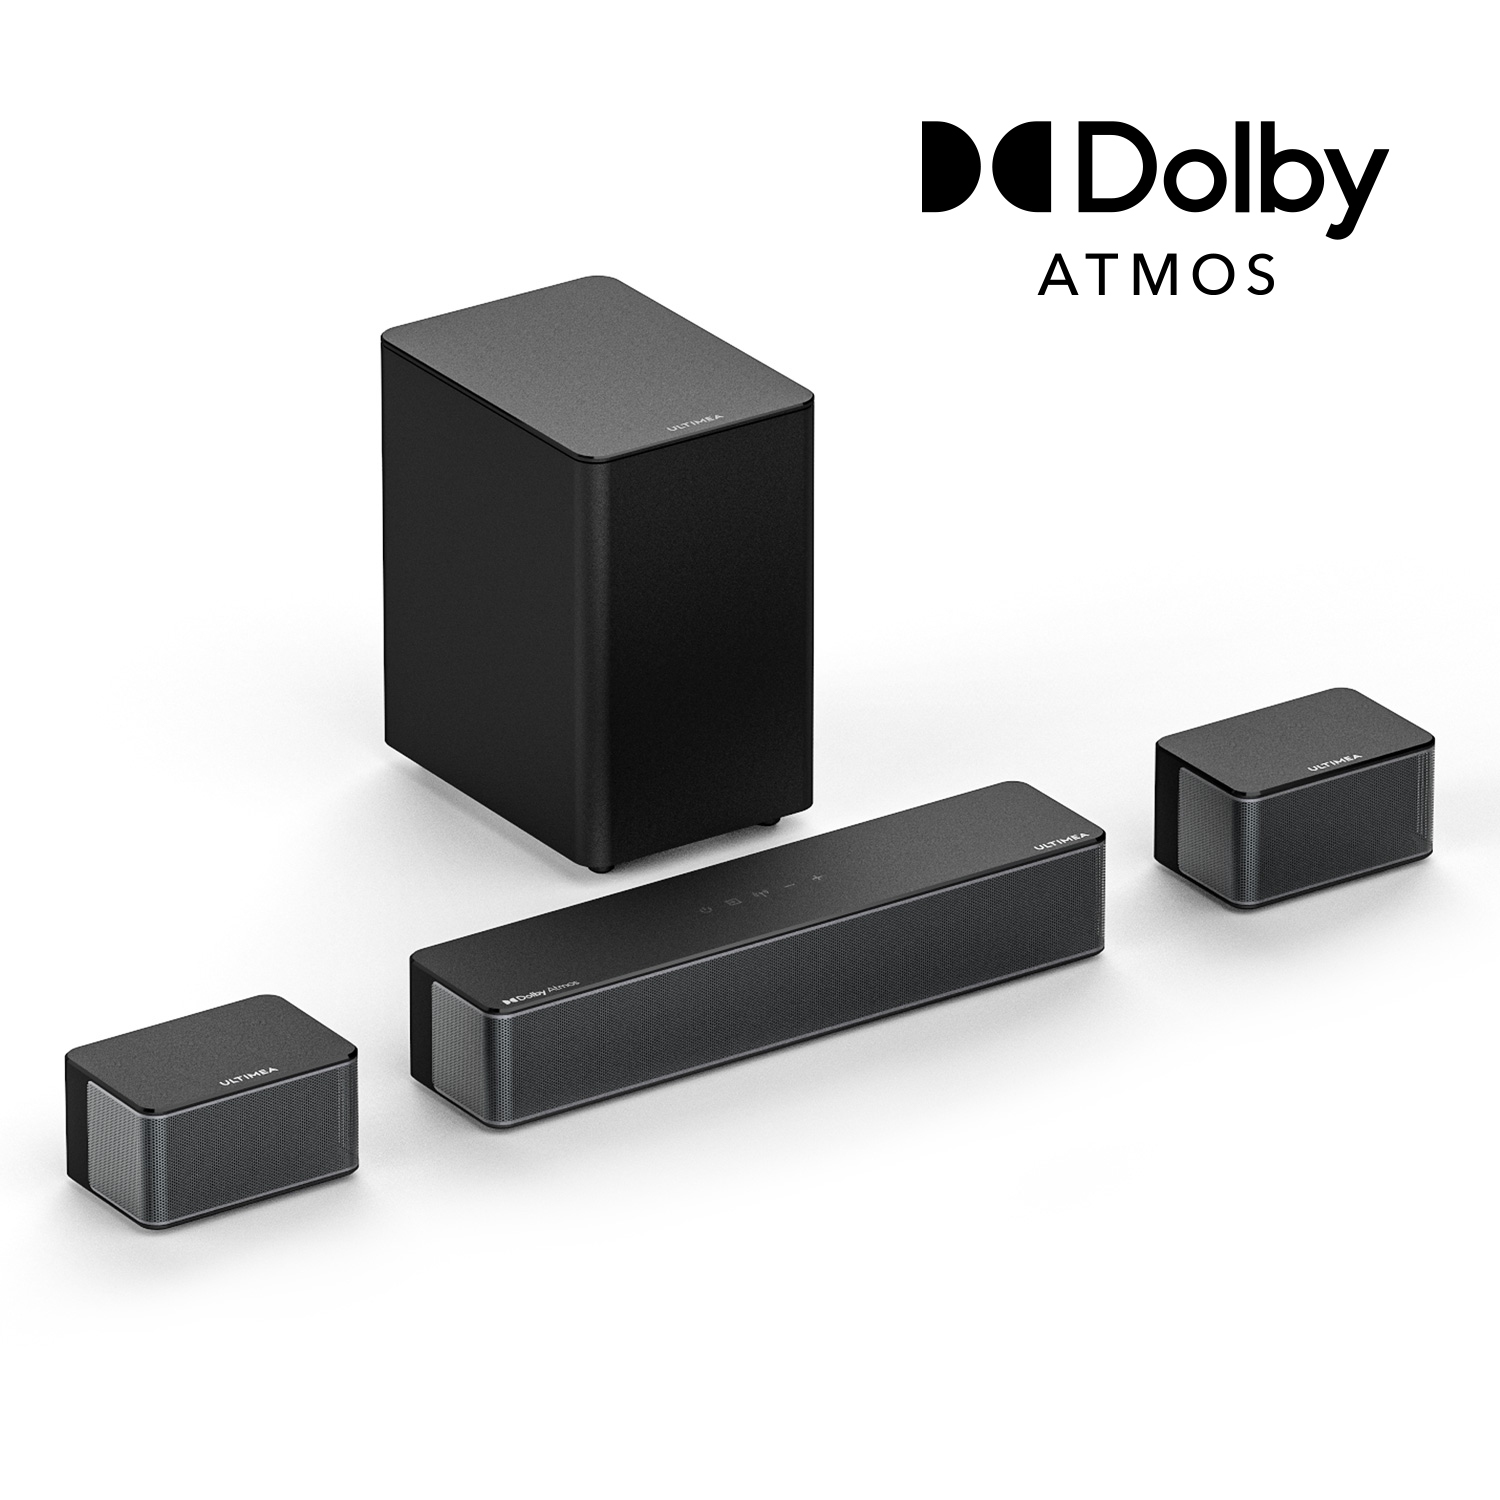 ULTIMEA 5.1ch Dolby Atmos Sound Bar, 3D Surround Sound System with Wireless Subwoofer,Surround and Bass Adjustable Home Theater Systems TV Speakers, Poseidon D60